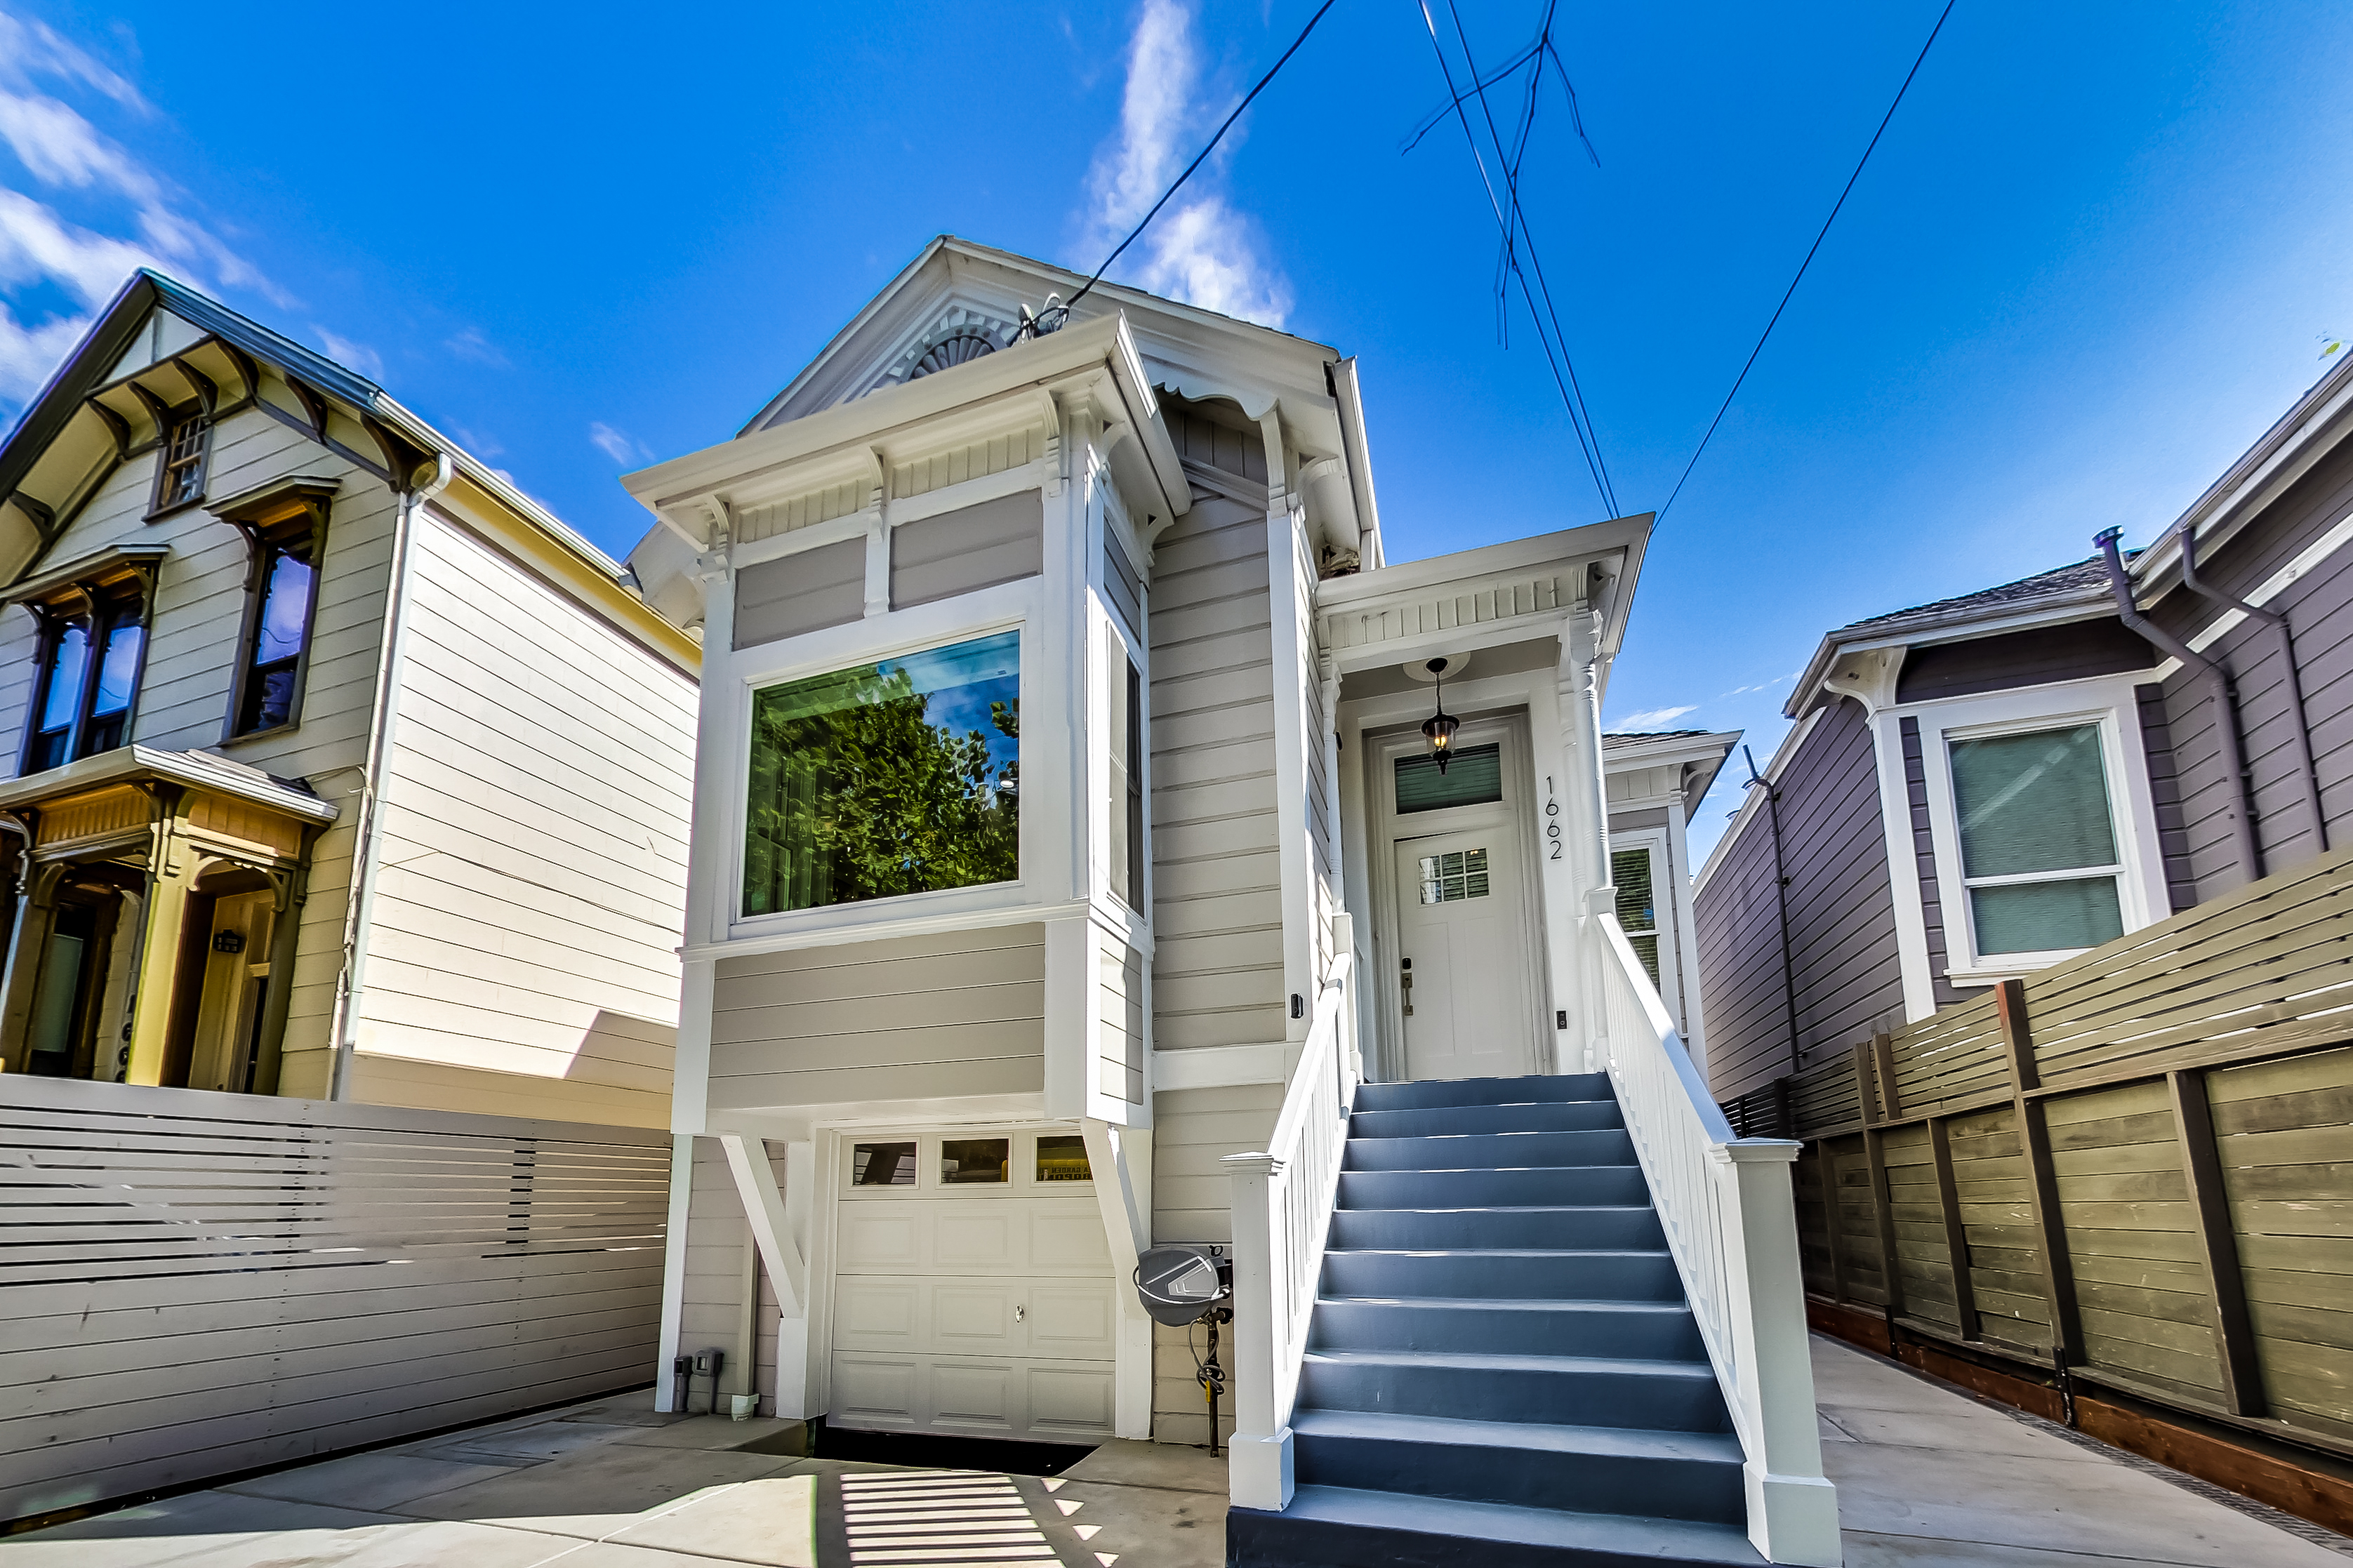 Property Image 1 - West oakland charmer: 2br/2bath house with cottage - AC & W/D